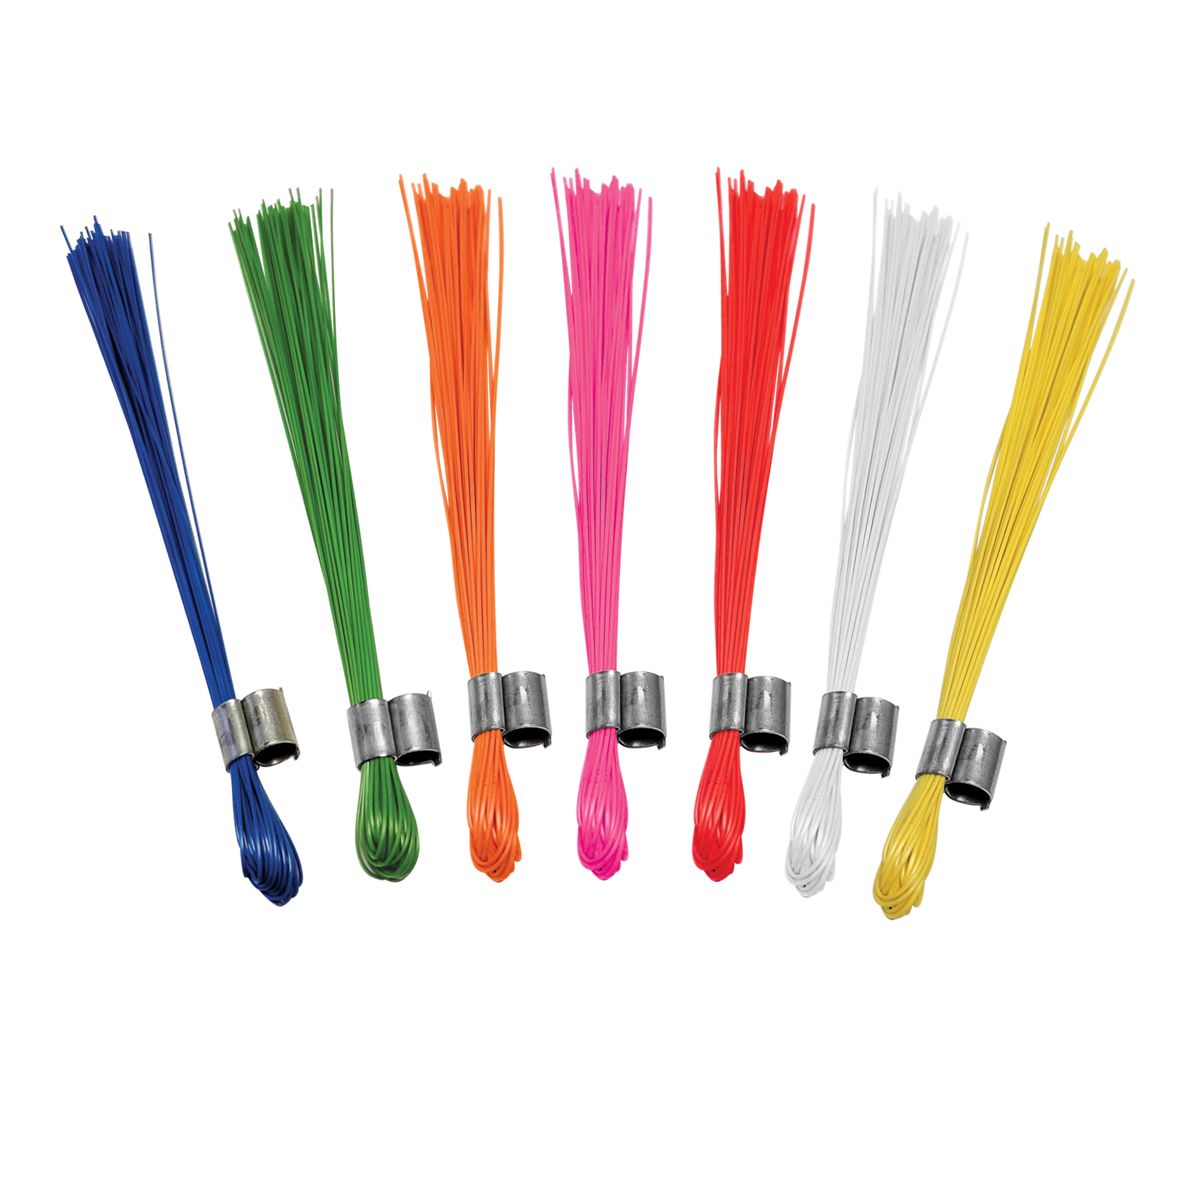 SitePro 19-SW6-Y Stake Whiskers, Yellow 25 per bundle